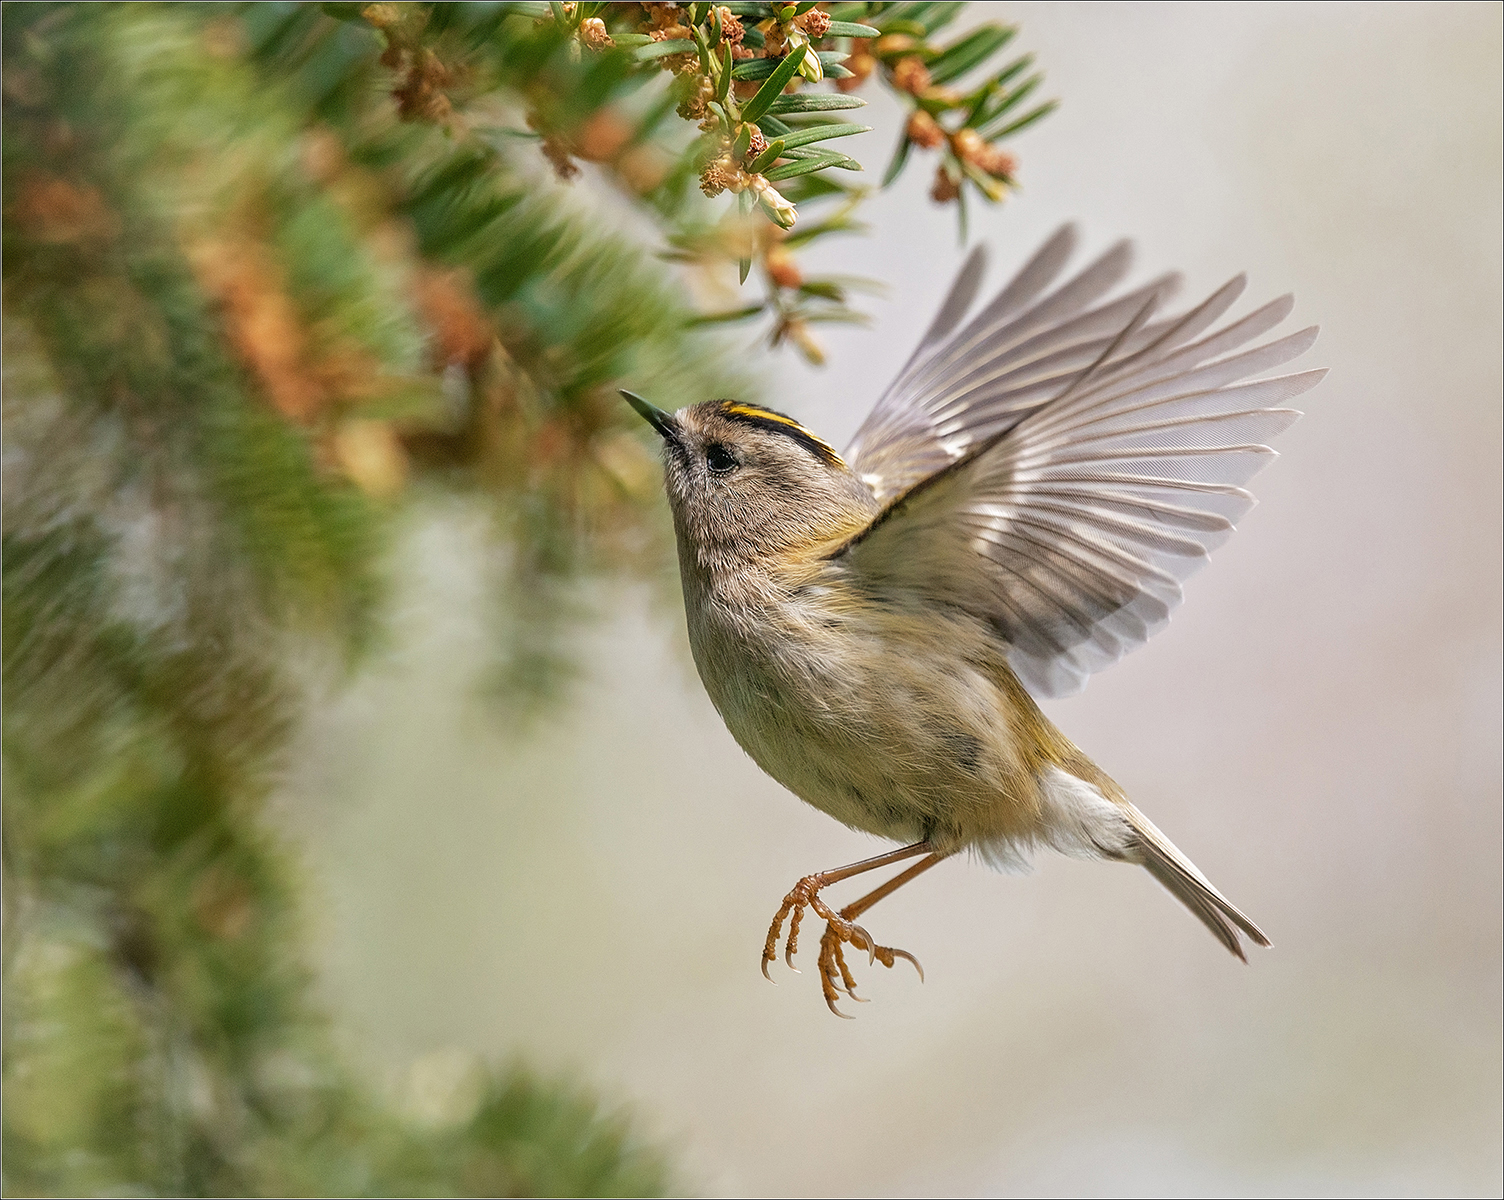 Goldcrest in Flight, by Angela Carr